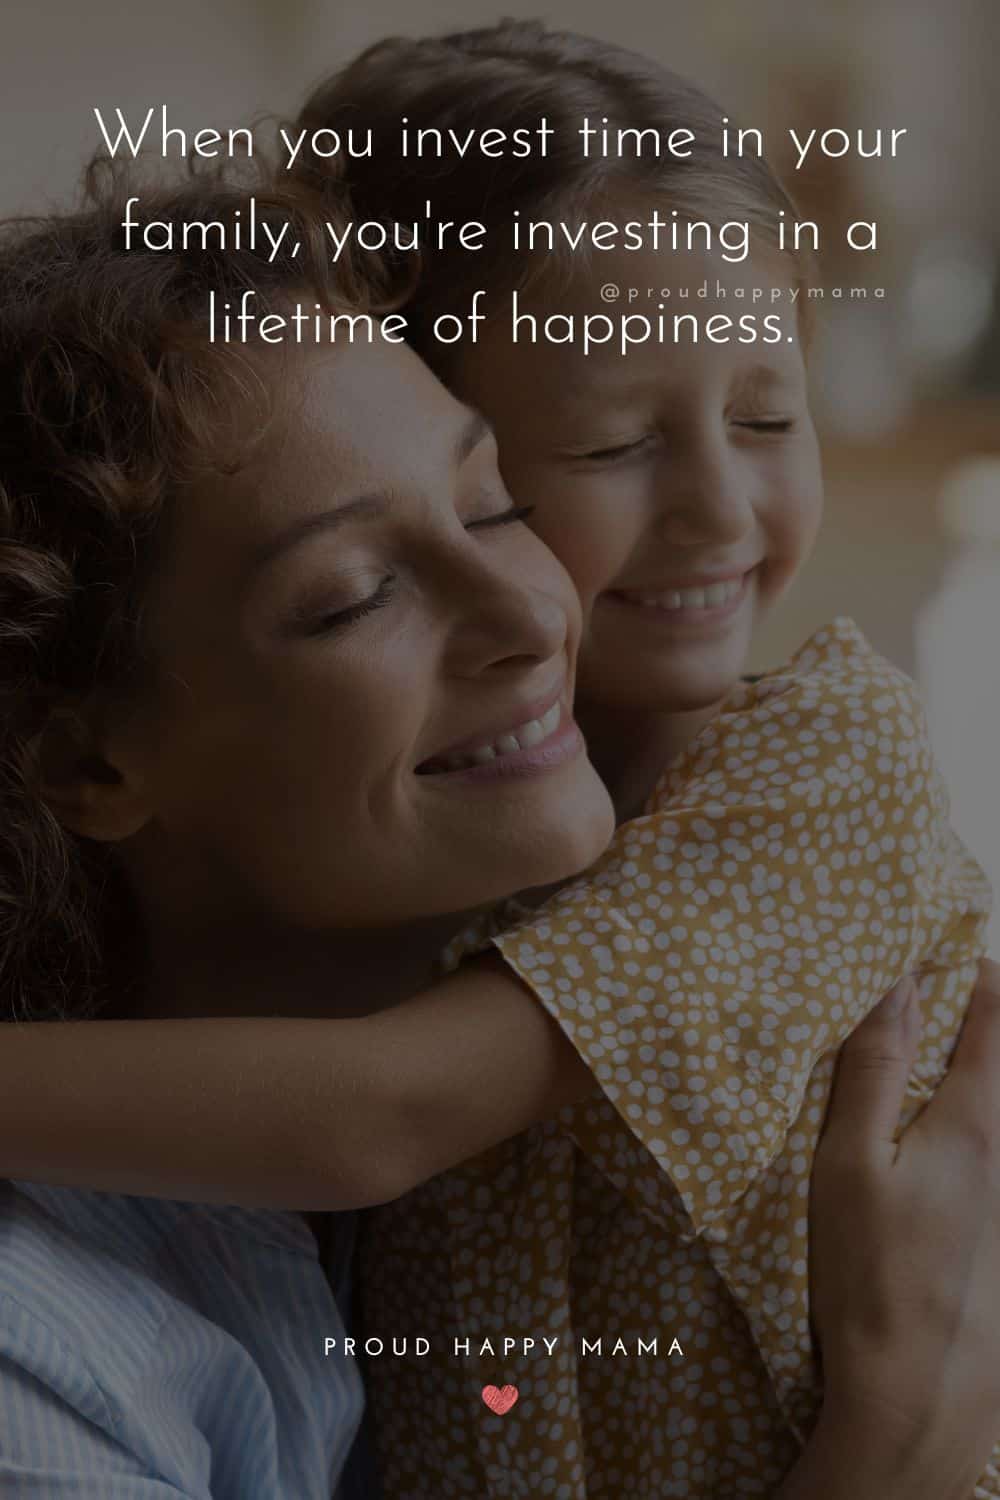 time with family quotes - When you invest time in your family, you're investing in a lifetime of happiness.